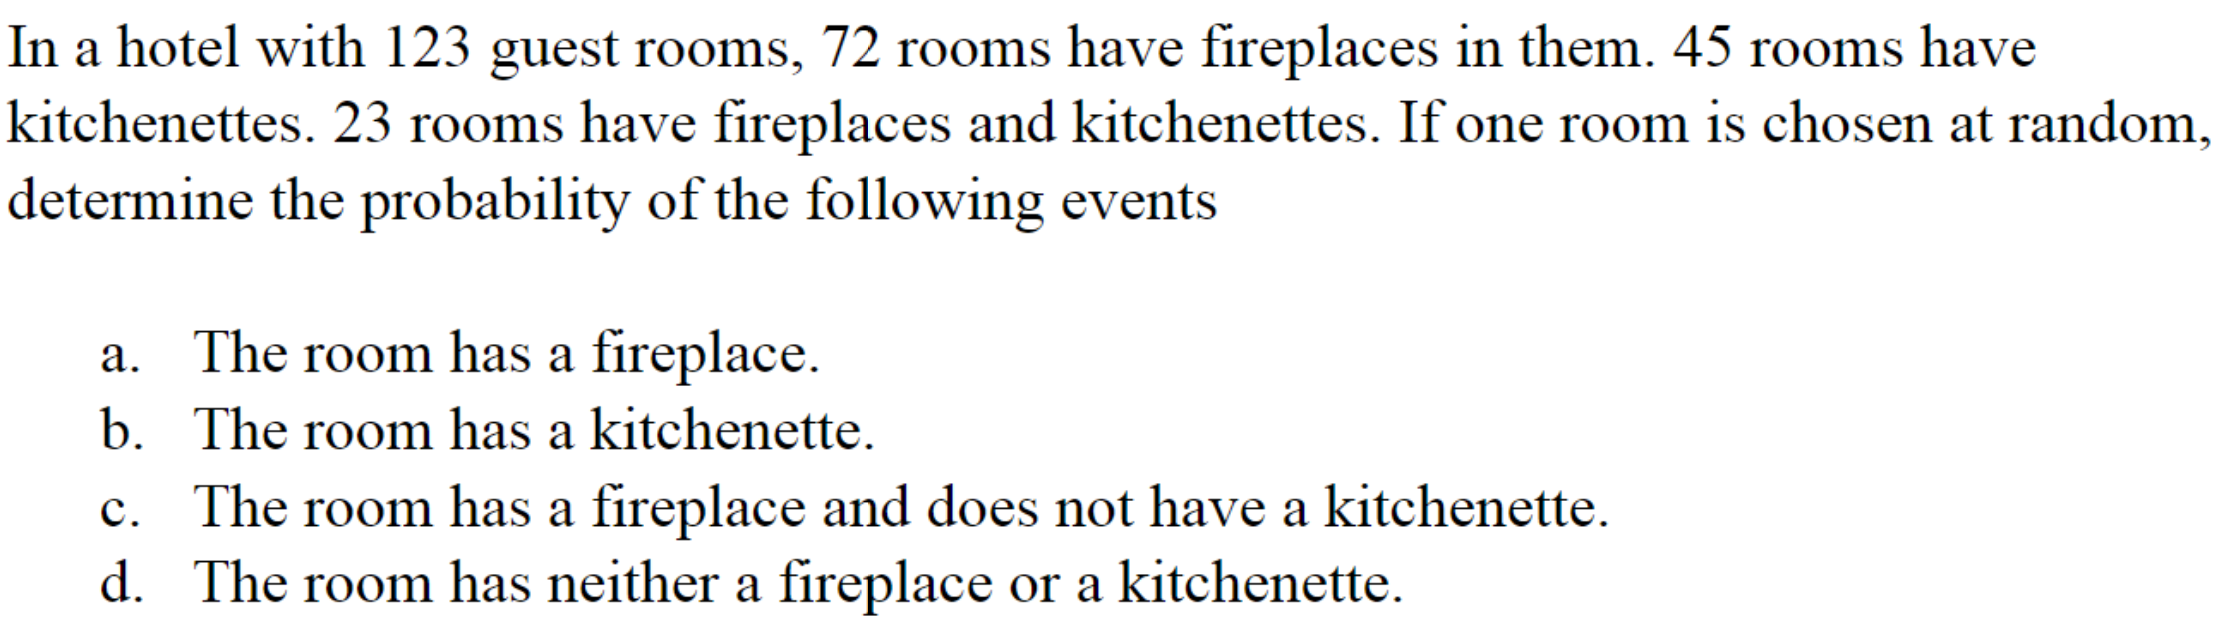 In a hotel with 123 guest rooms, 72 rooms have fireplaces in them. 45 rooms have
kitchenettes. 23 rooms have fireplaces and kitchenettes. If one room is chosen at random,
determine the probability of the following events
a. The room has a fireplace.
b. The room has a kitchenette.
c. The room has a fireplace and does not have a kitchenette.
d. The room has neither a fireplace or a kitchenette.
